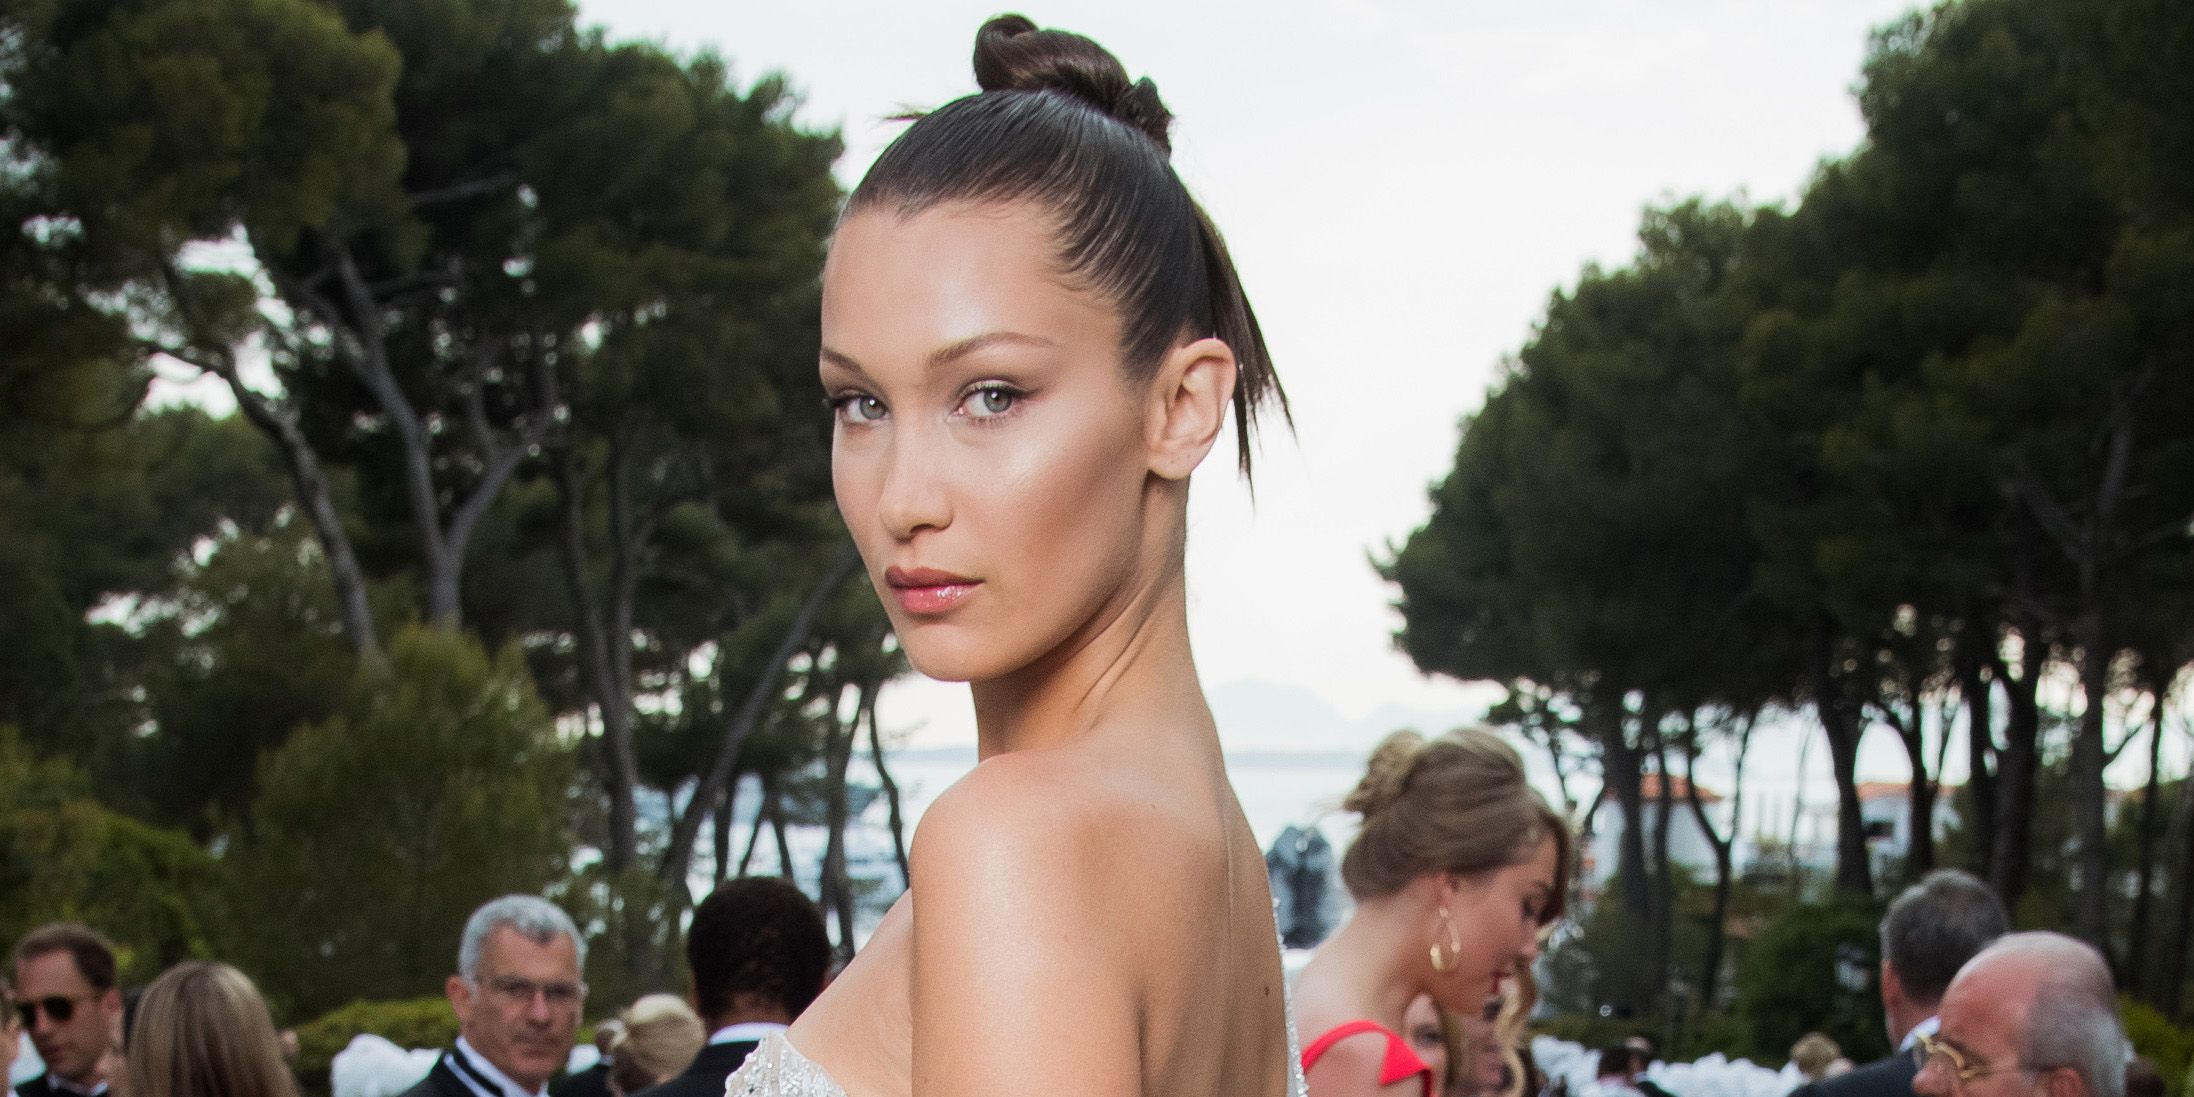 Monaco Beach Nude - Bella Hadid Is Posing Nude on the Beach and Living Her Best ...